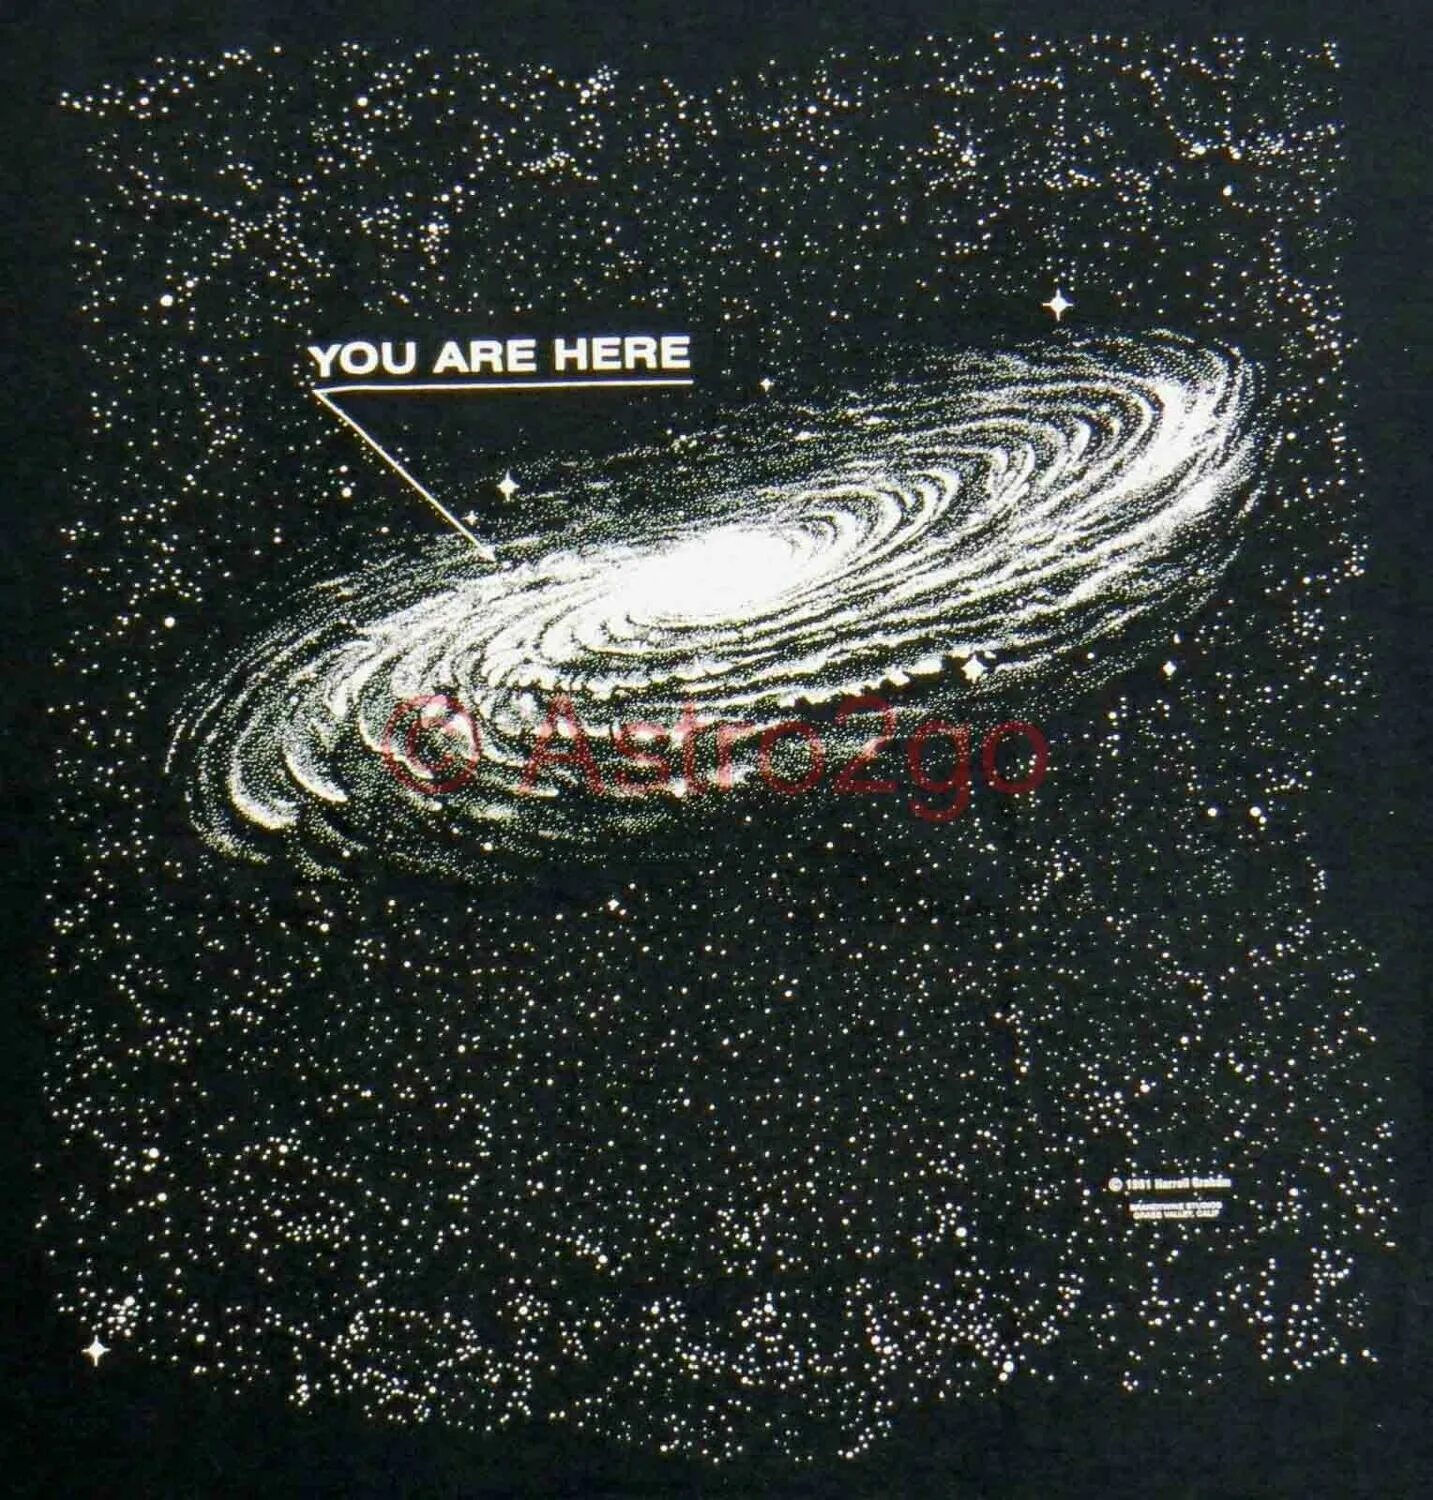 You are here Вселенная. You are here Млечный путь. Млечный путь Галактика хорошего качества с рукавами. You are here Milky way. Space here